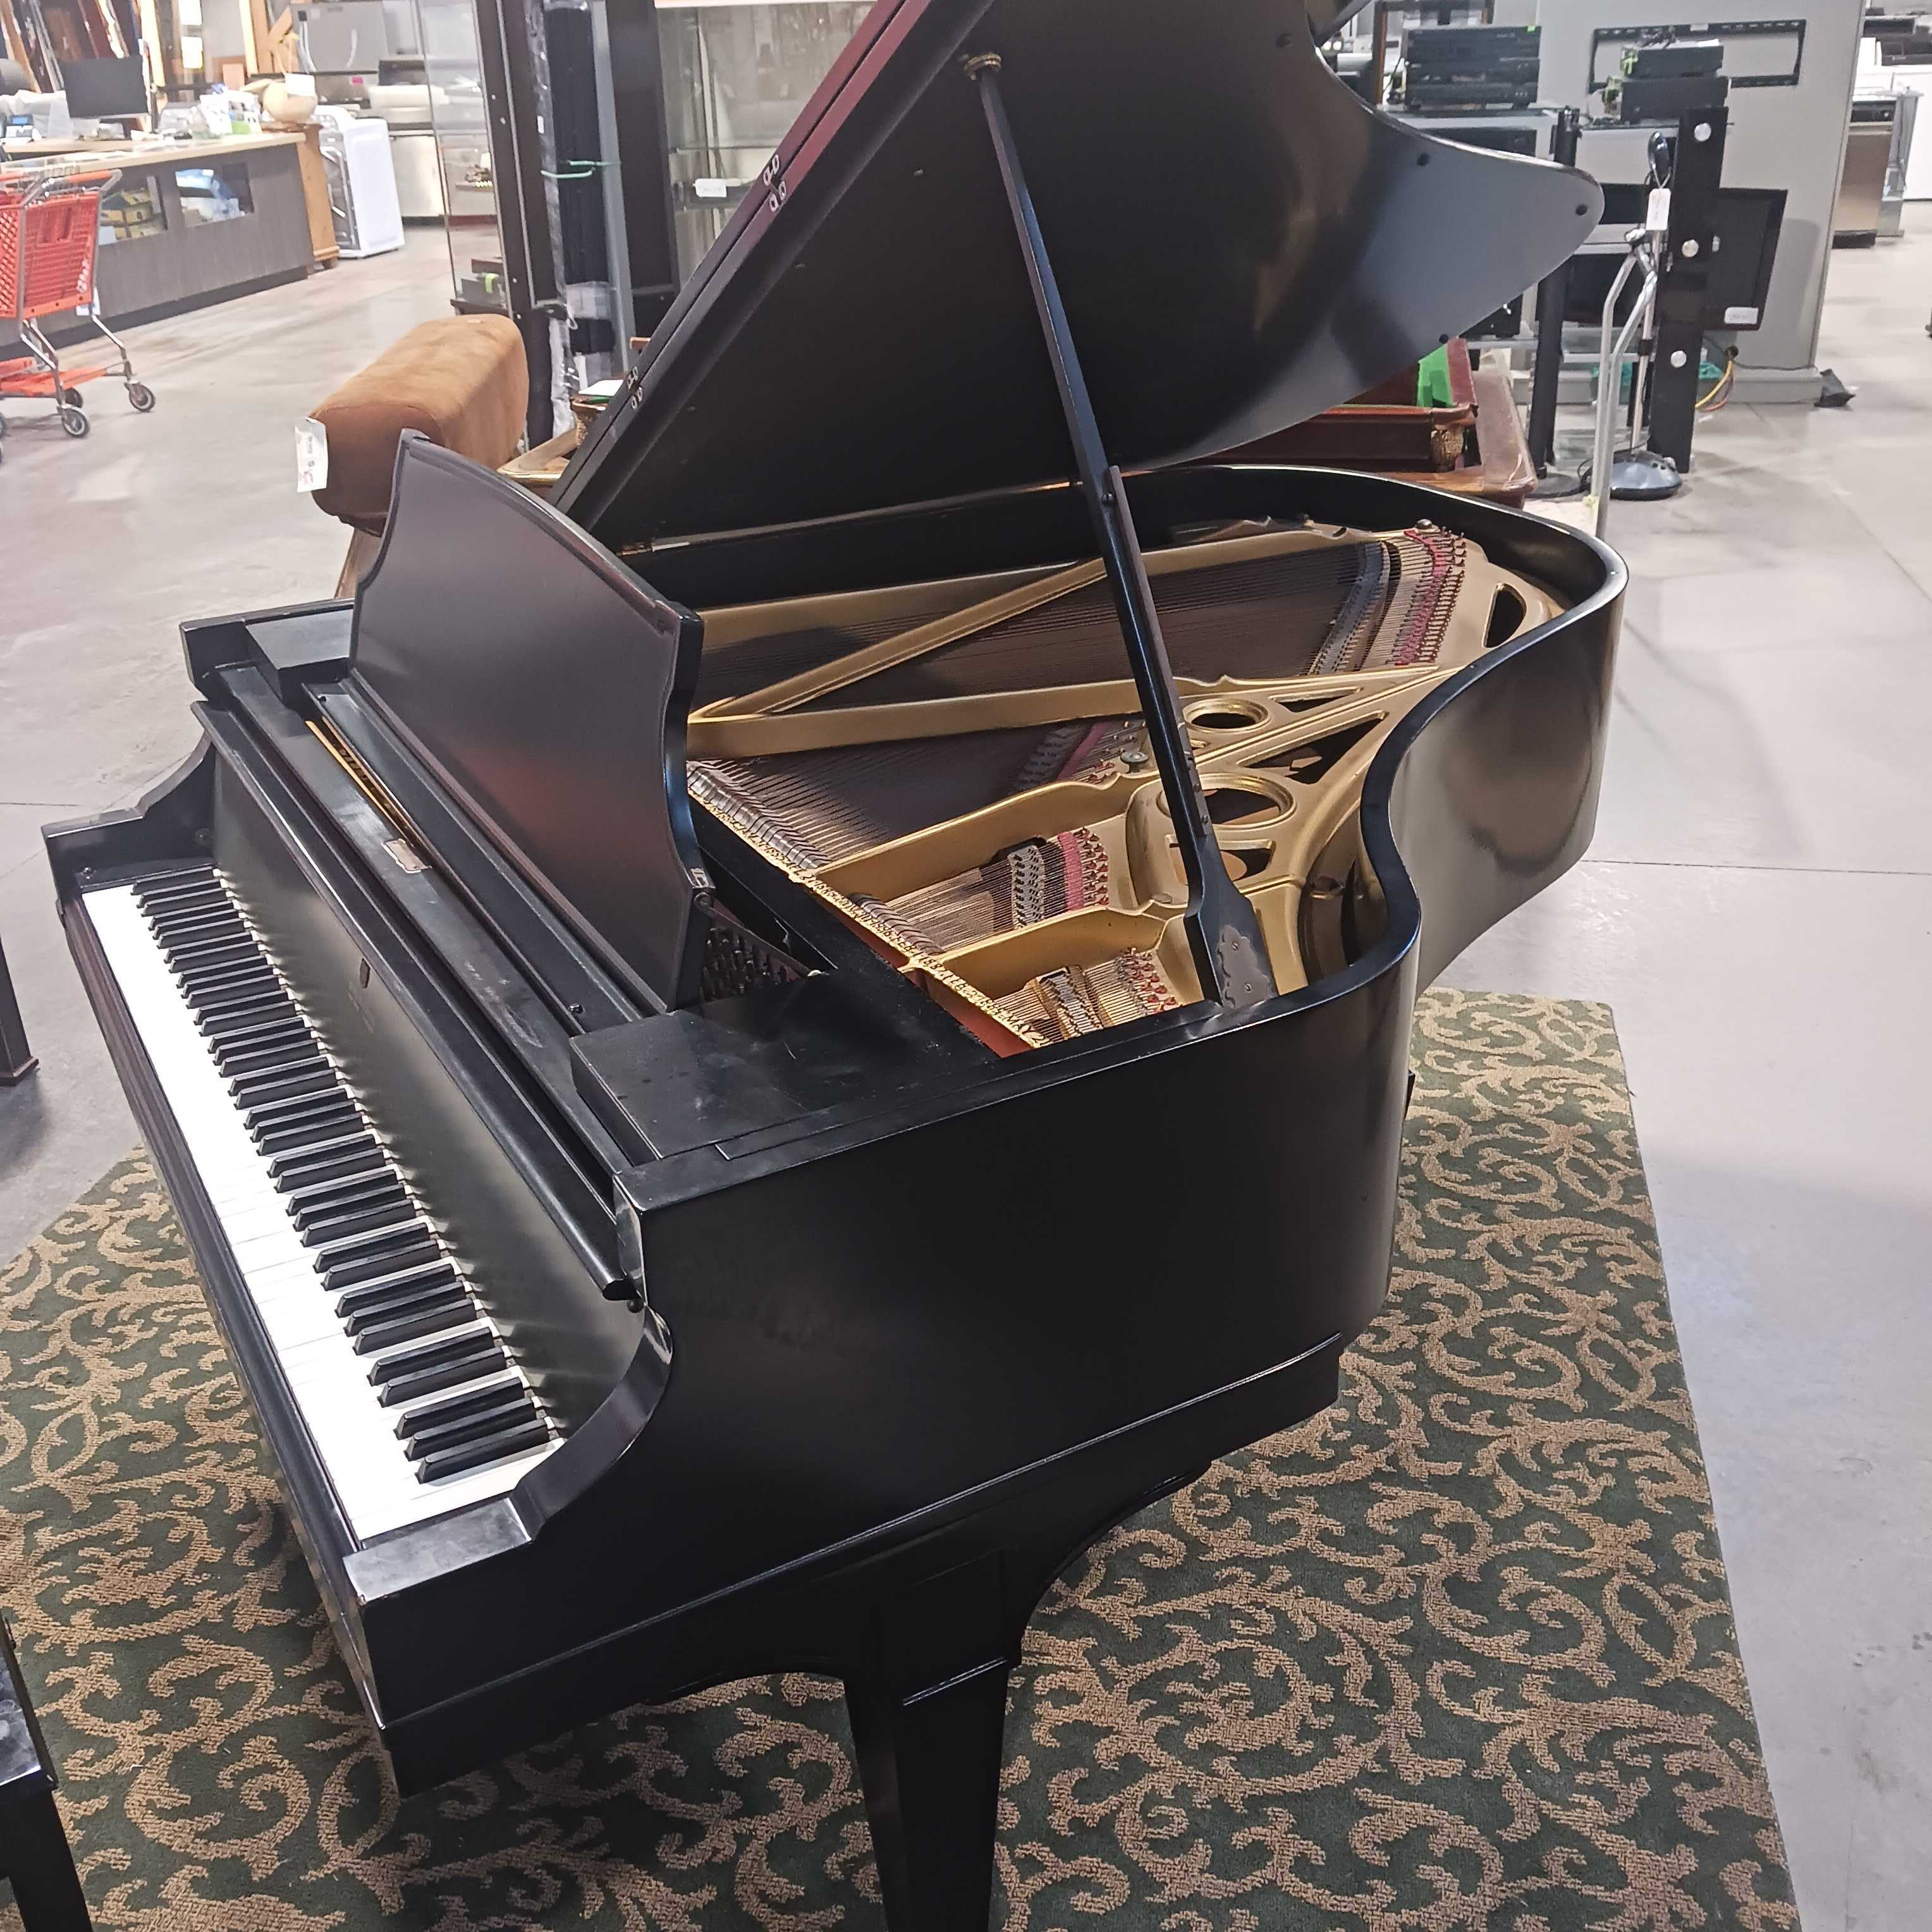 1920's Mehlin and Sons Baby Grand Piano